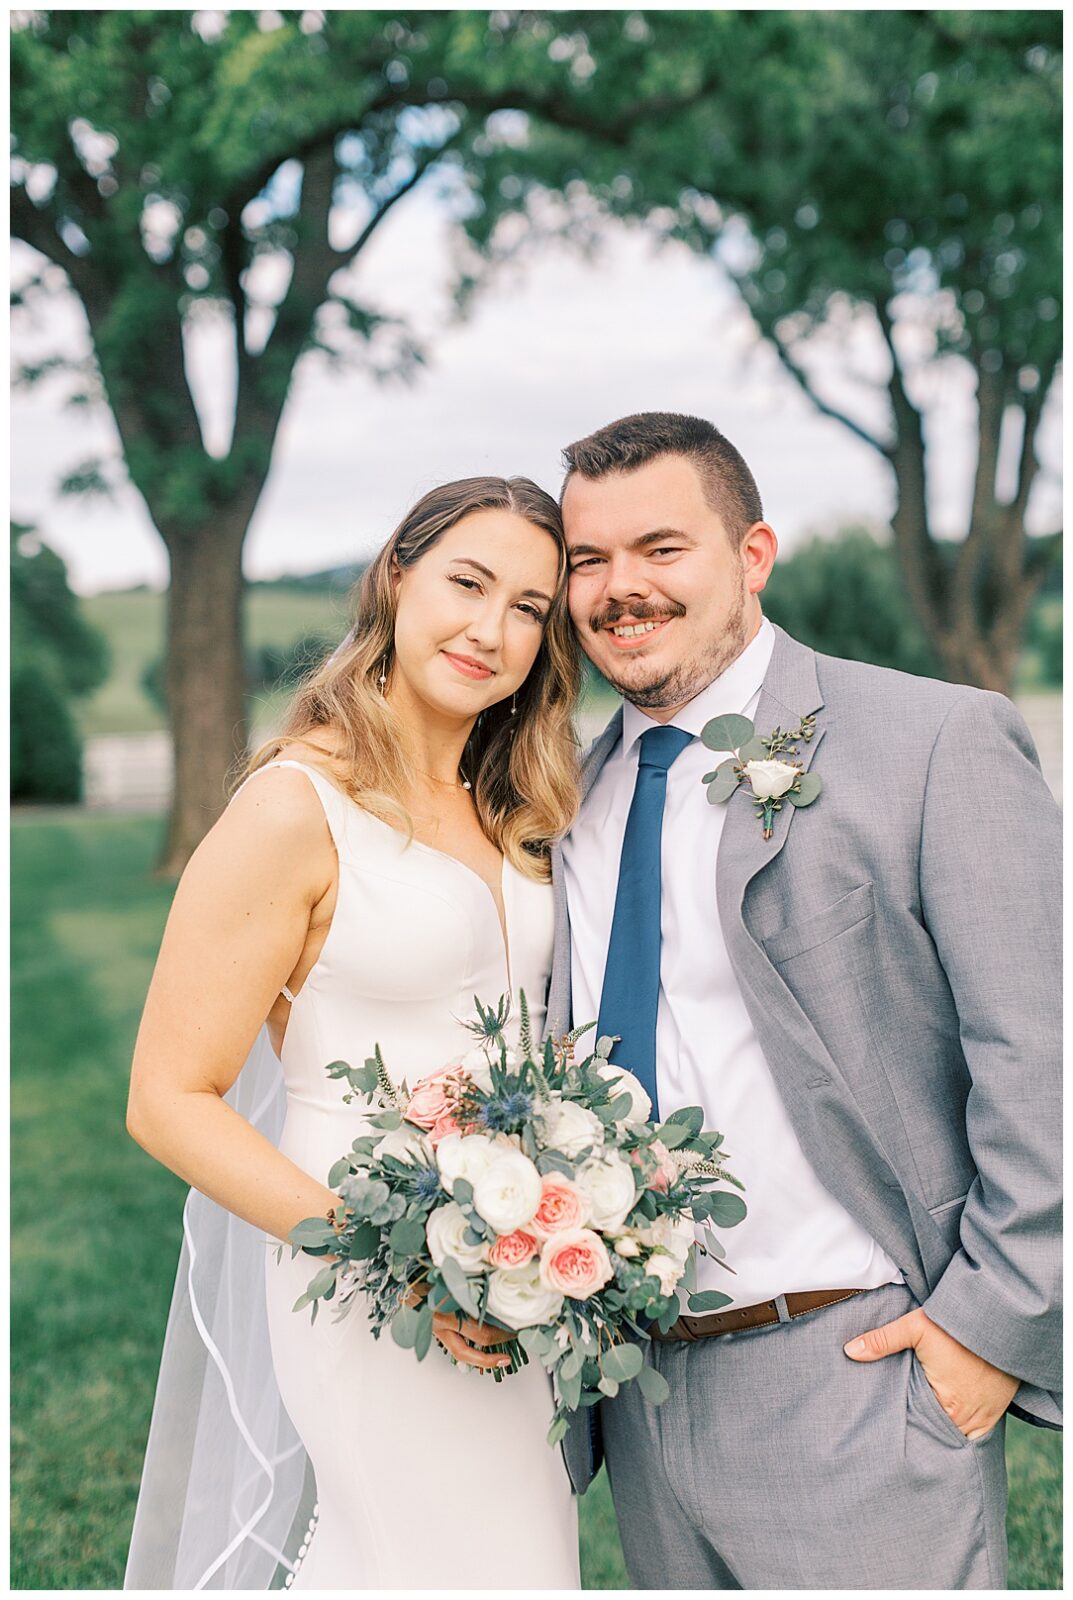 Summer Wedding at Bluebird Manor - https://www.andreacablephotography.com